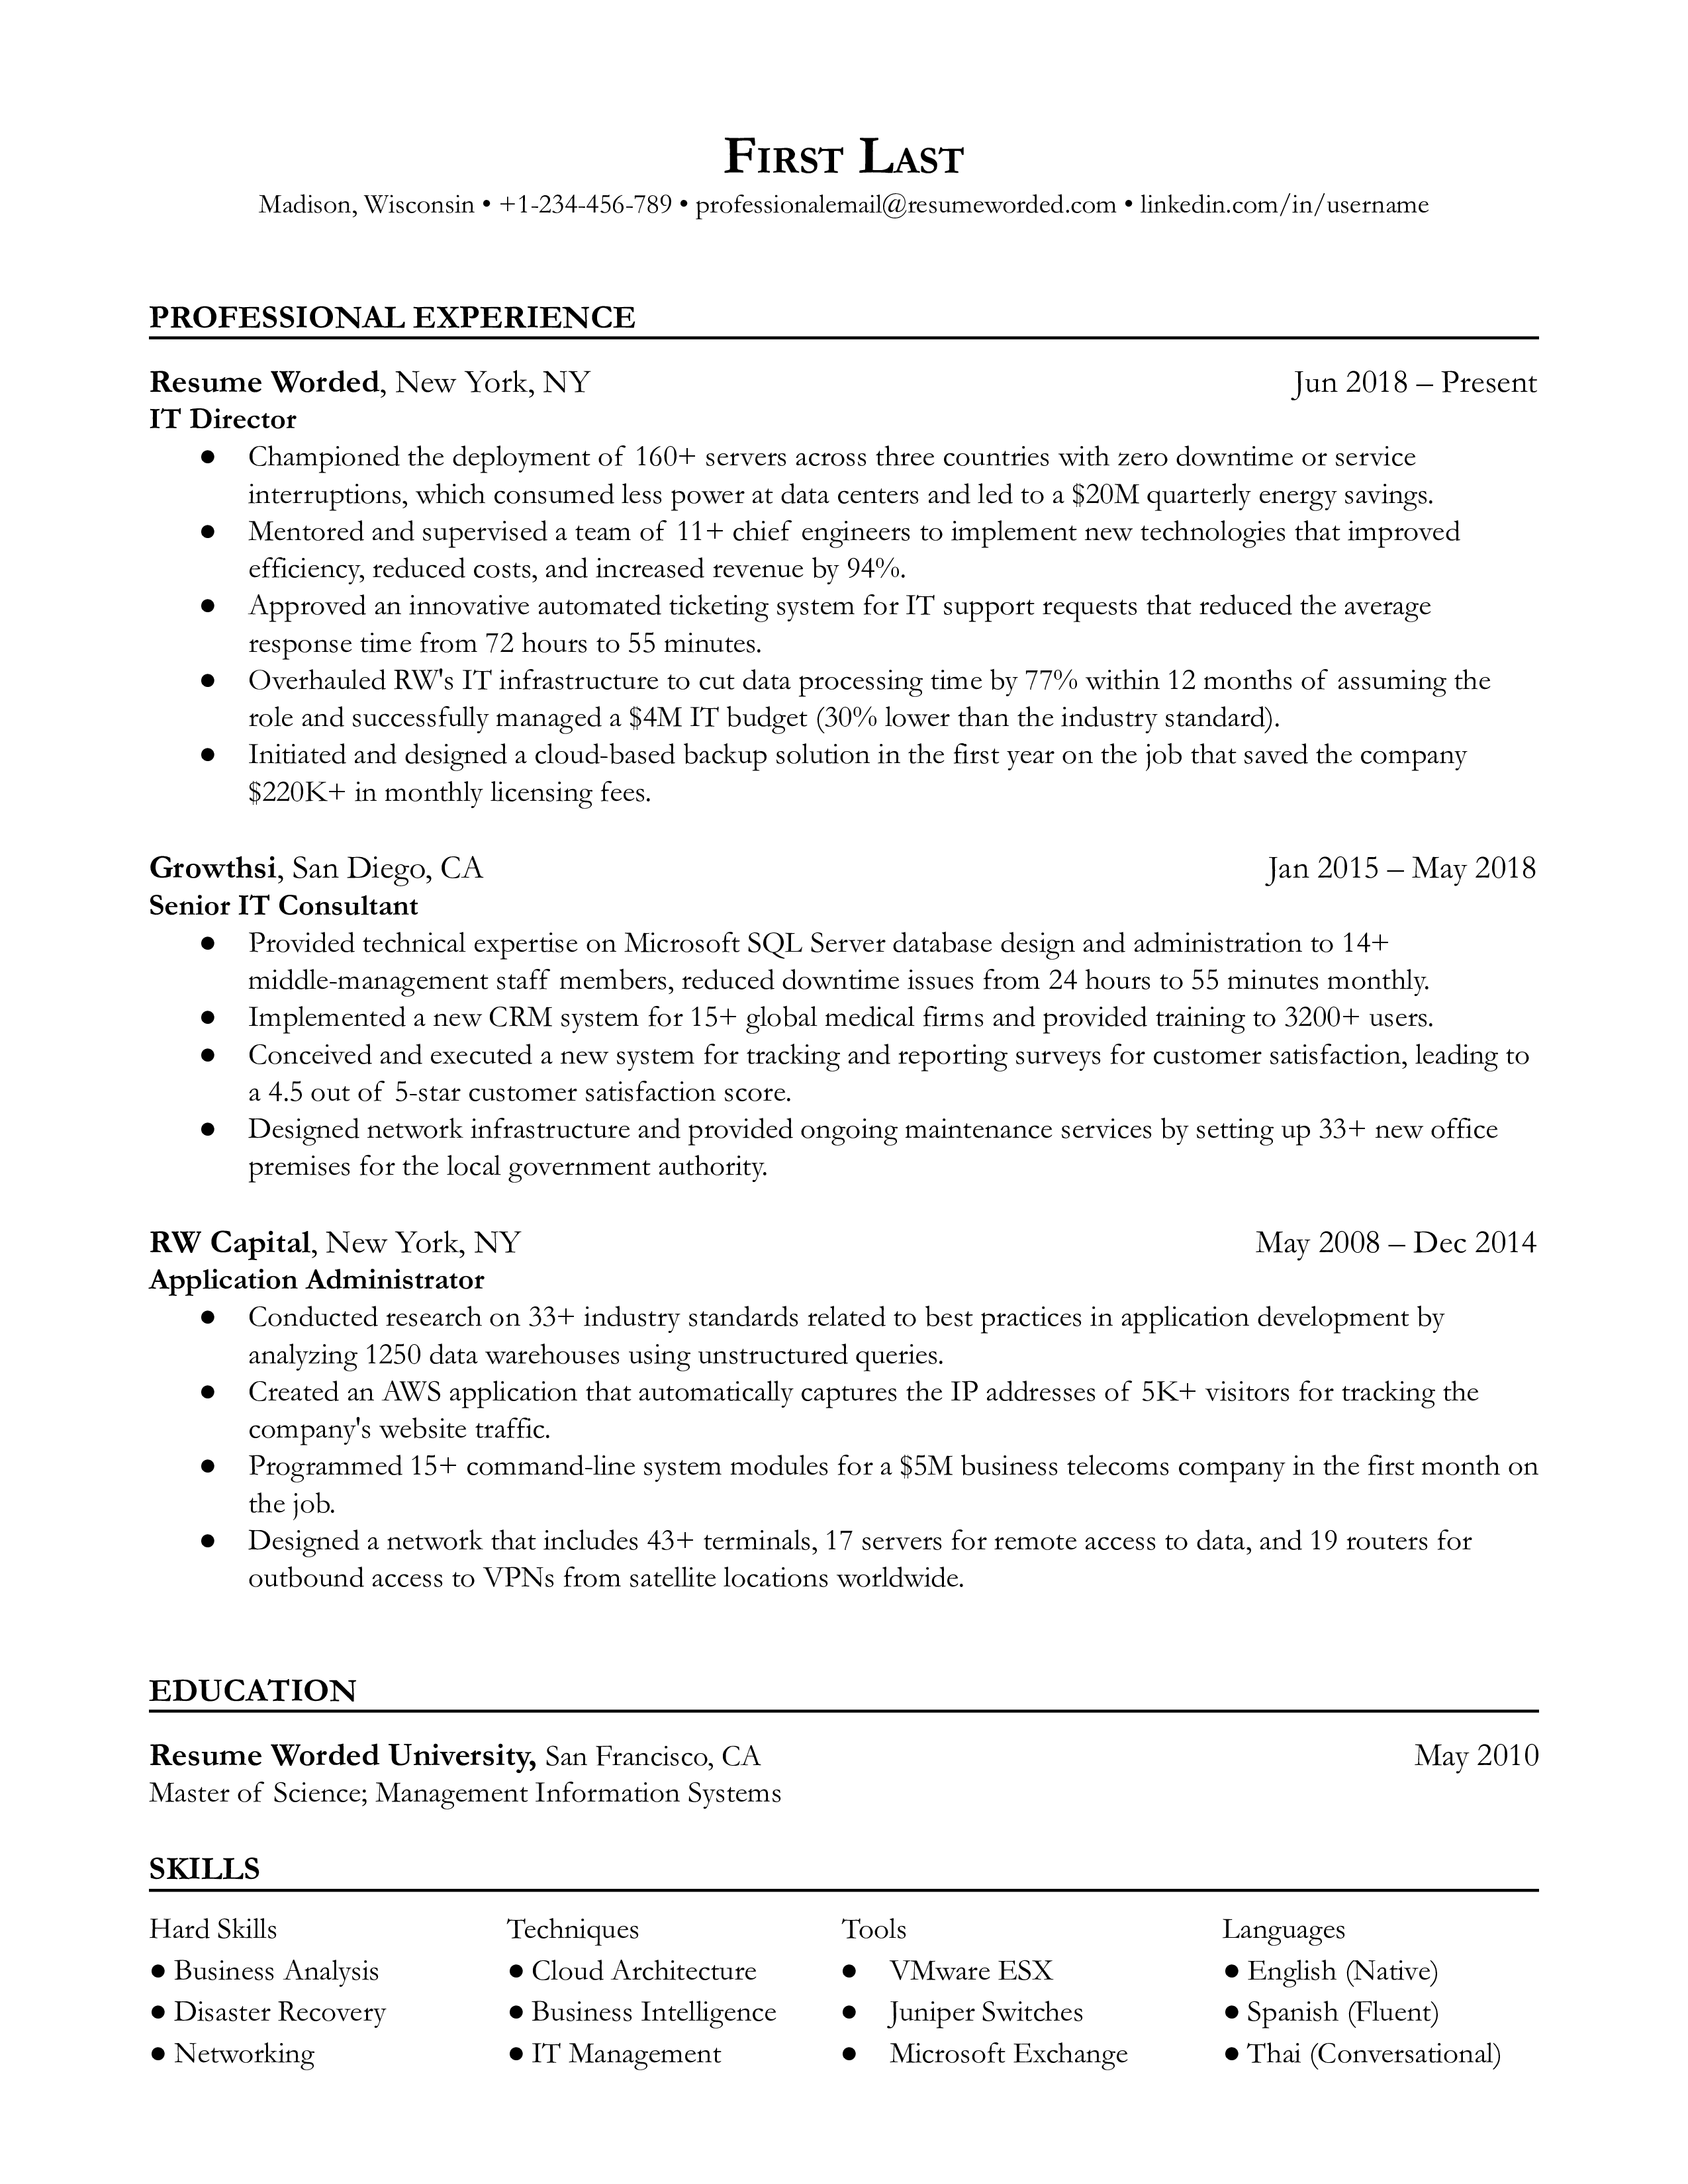  An IT director resume template separating the skills section by tools, techniques, languages, and hard skills.